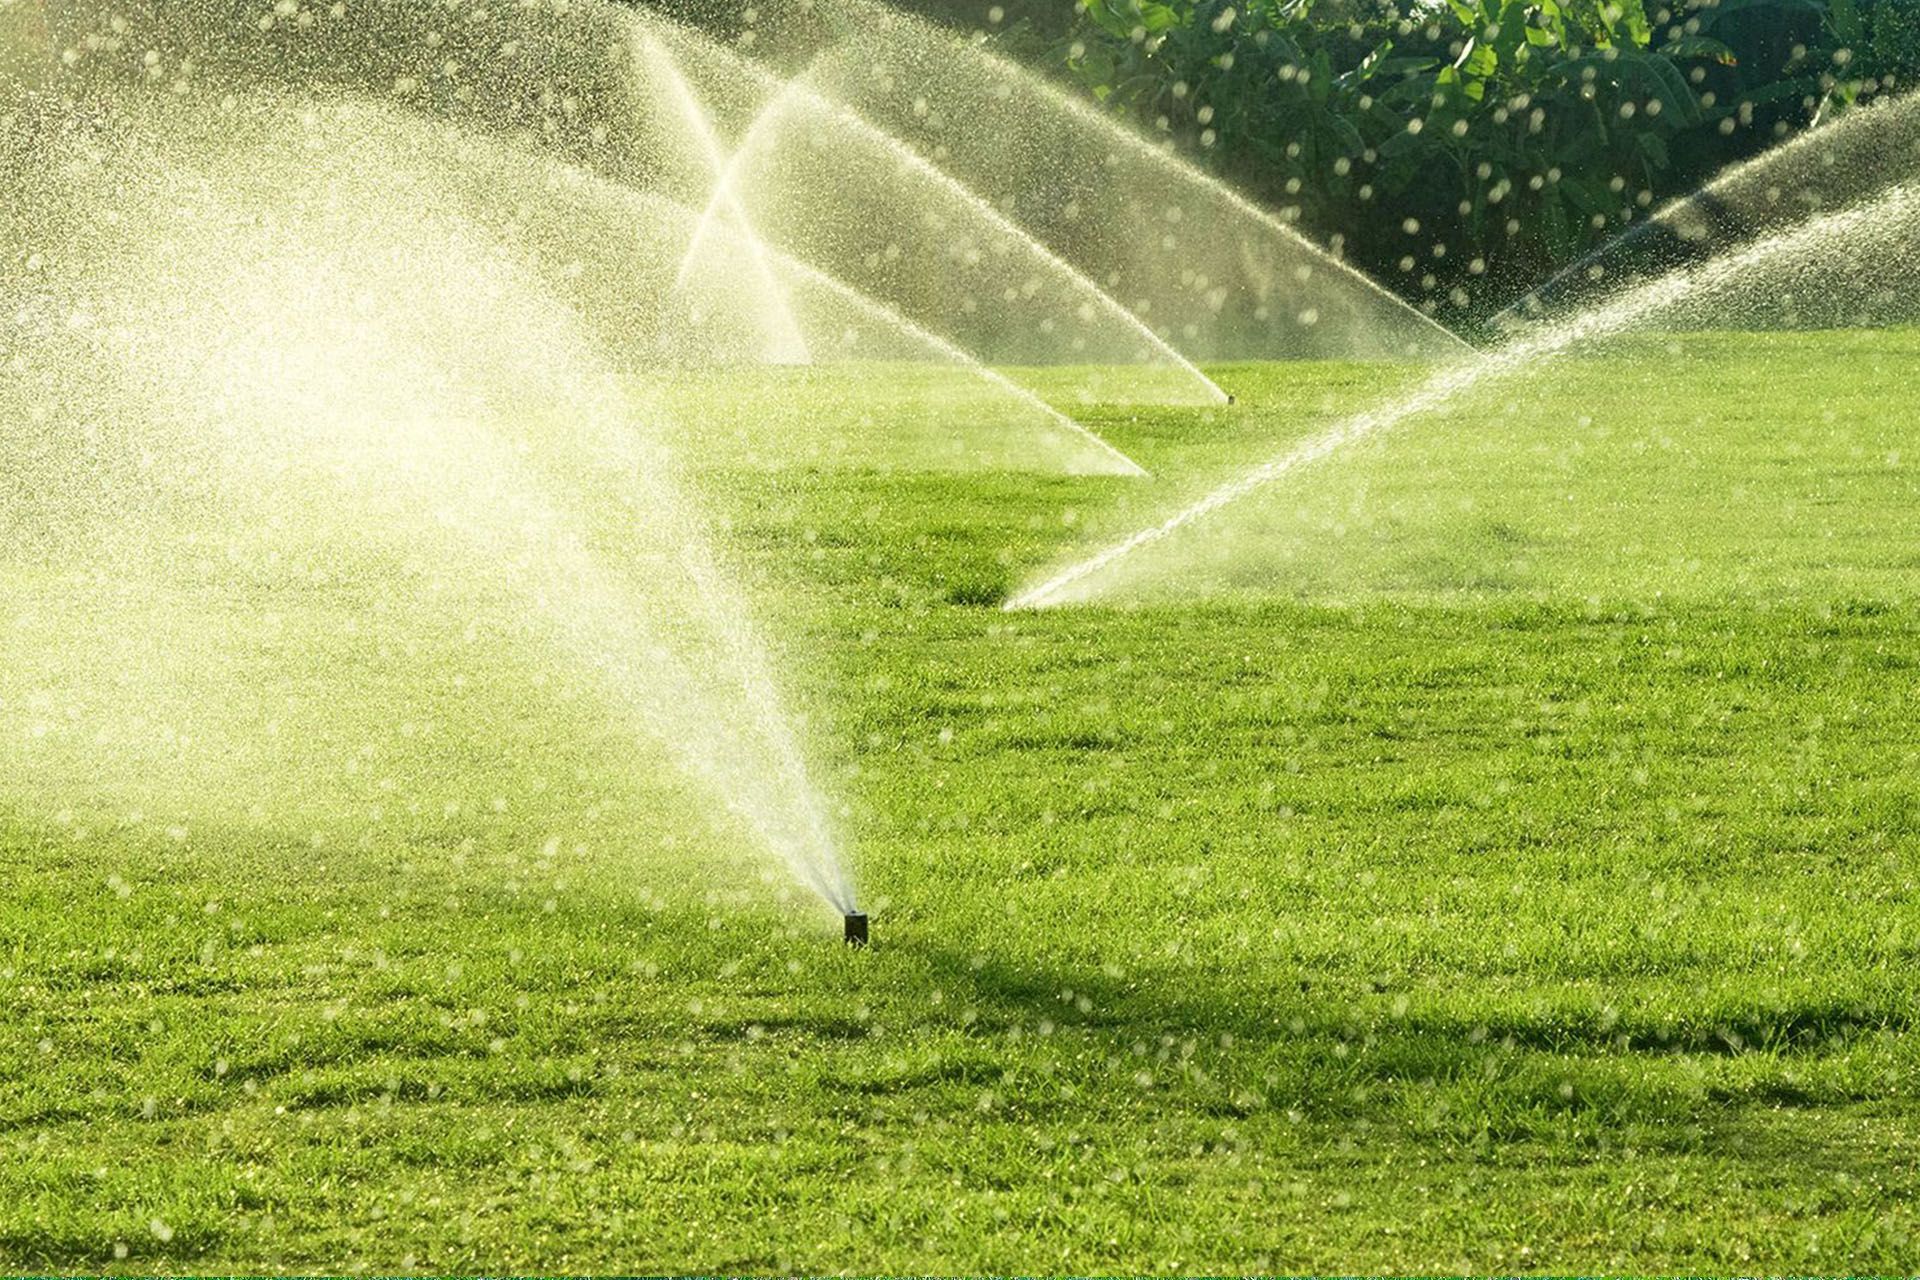 a row of sprinklers spraying water on a lush green field